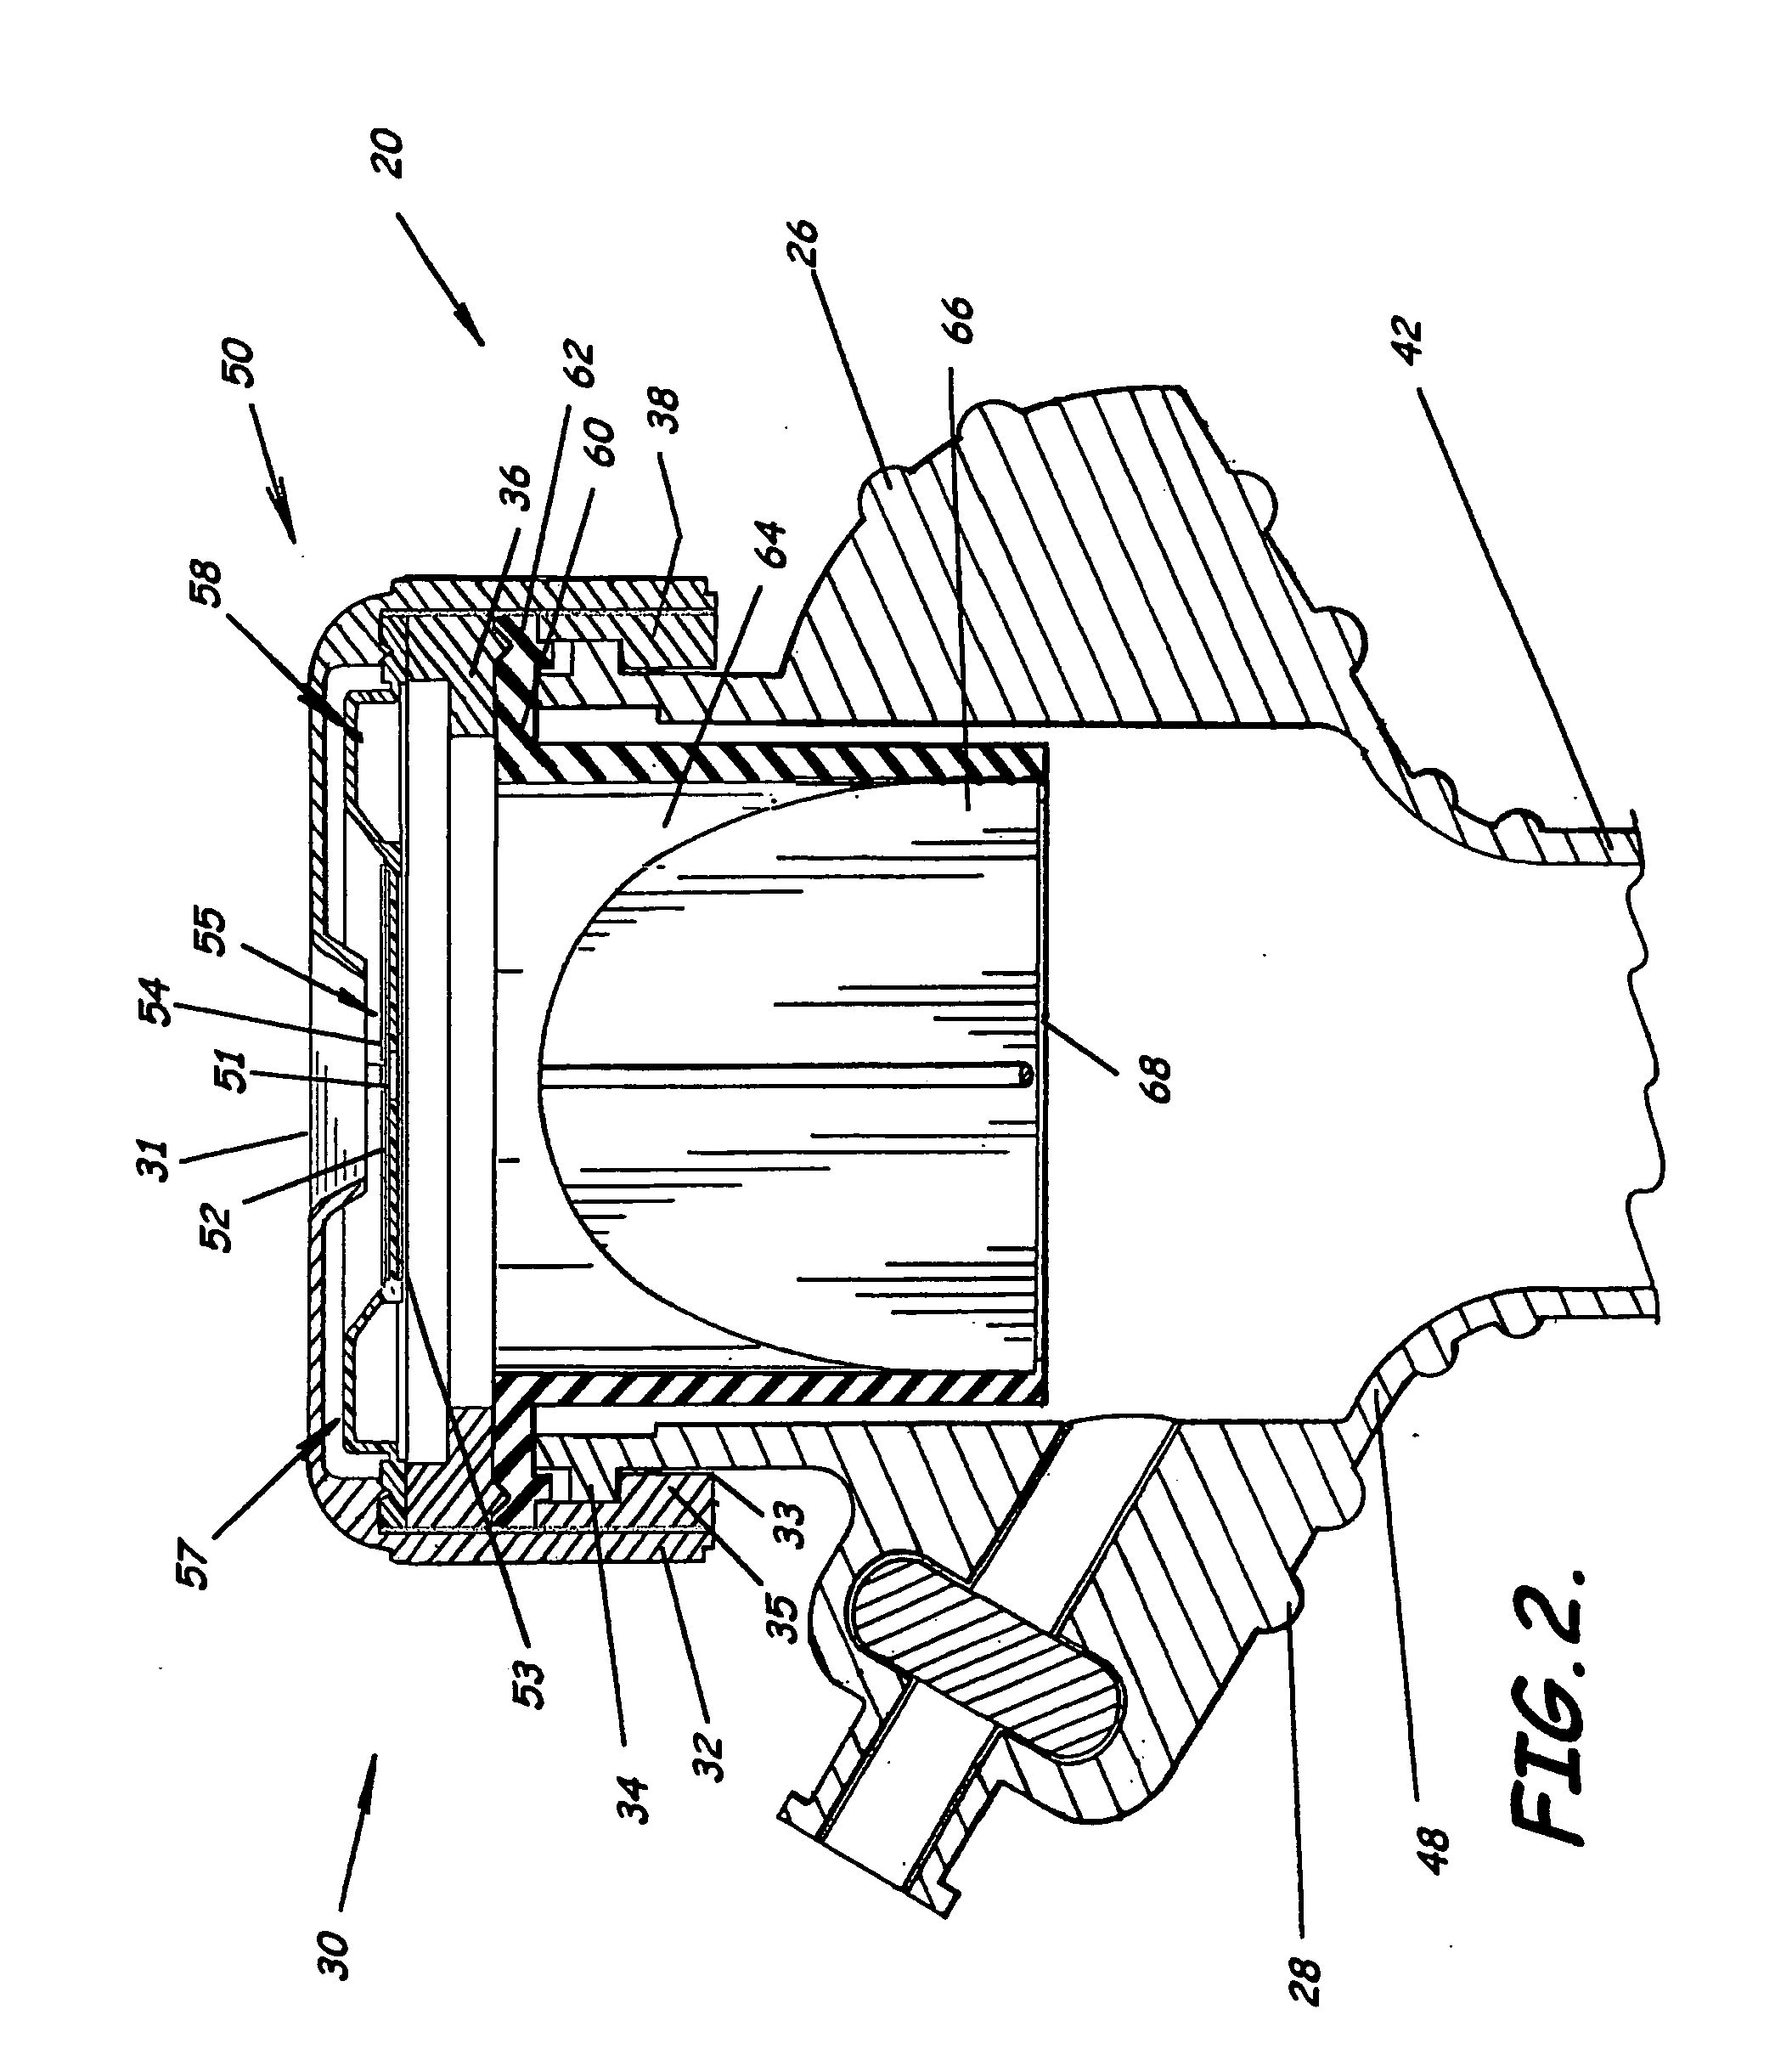 Trocar having planar fixed septum seal and related methods